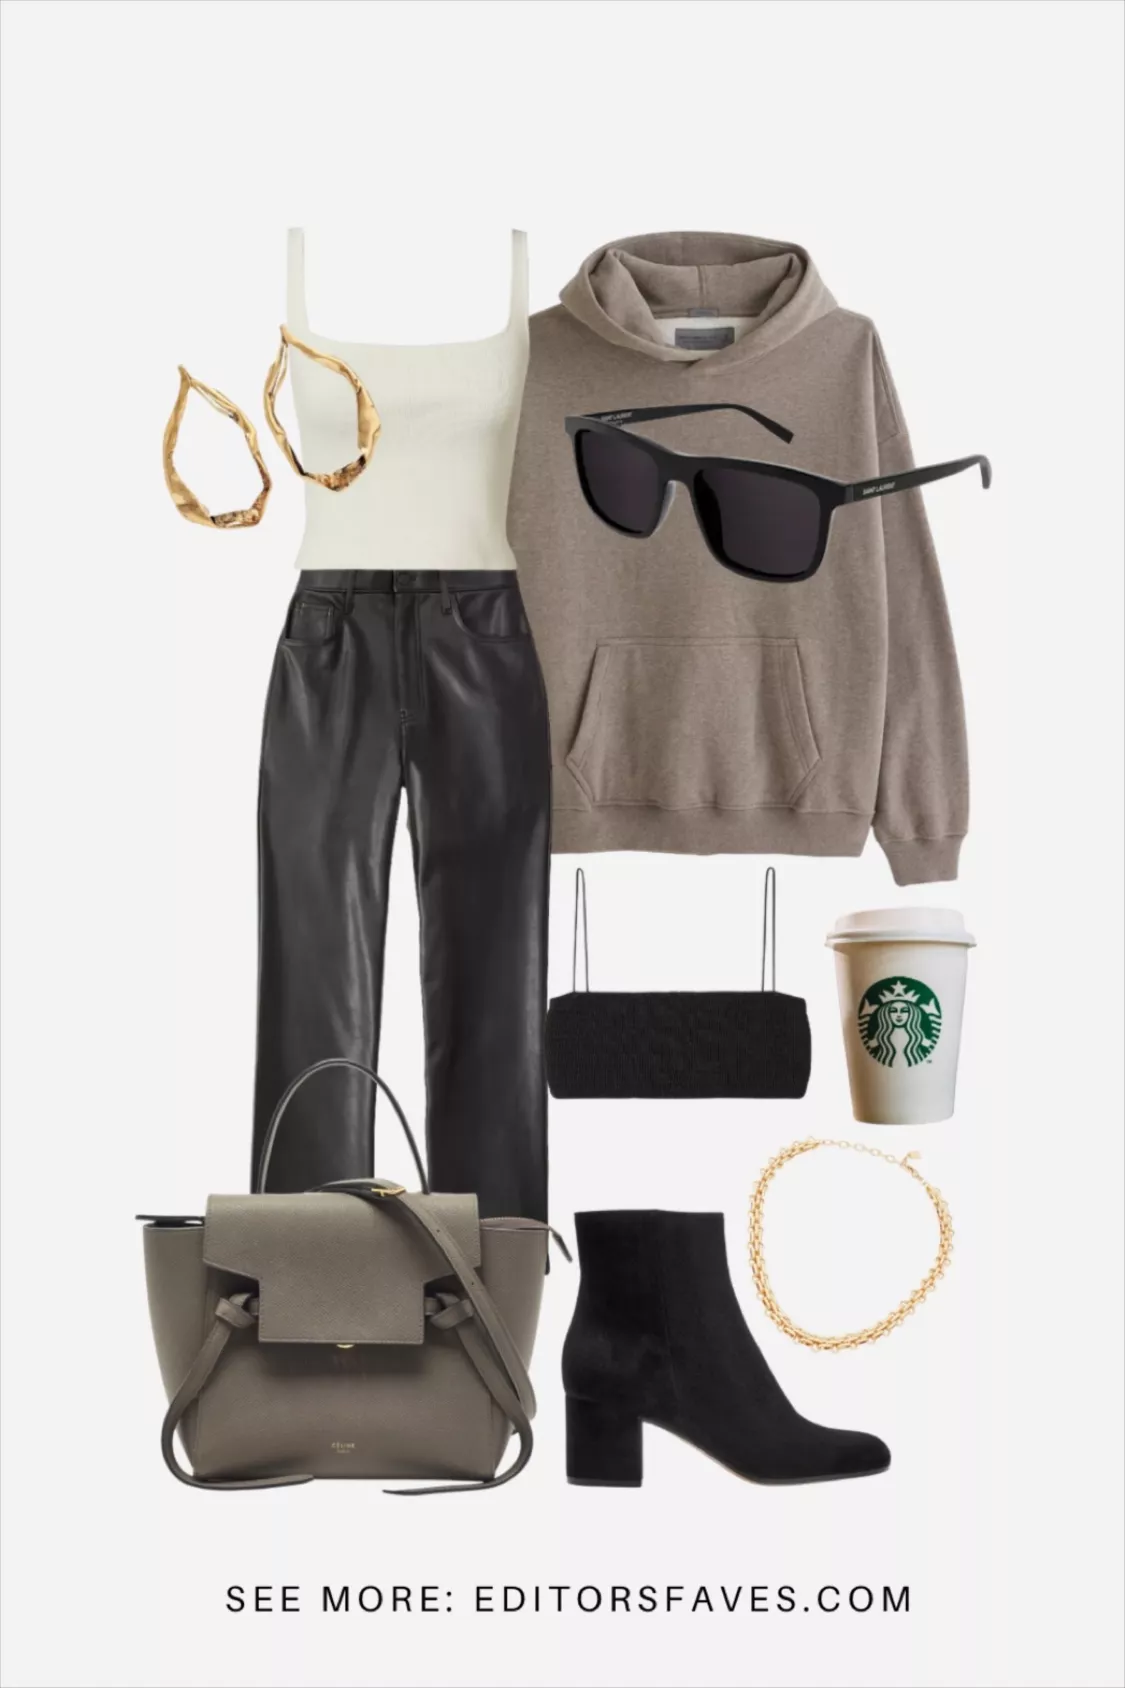 Coffee run casual outfit for Fall. Fall capsule wardrobe outfit ideas. Styling a capsule wardrobe for Fall tips. Check out my full Fall Capsule Wardrobe guide at EditorsFaves.com 🤍

#LTKBacktoSchool #LTKcurves #LTKstyletip